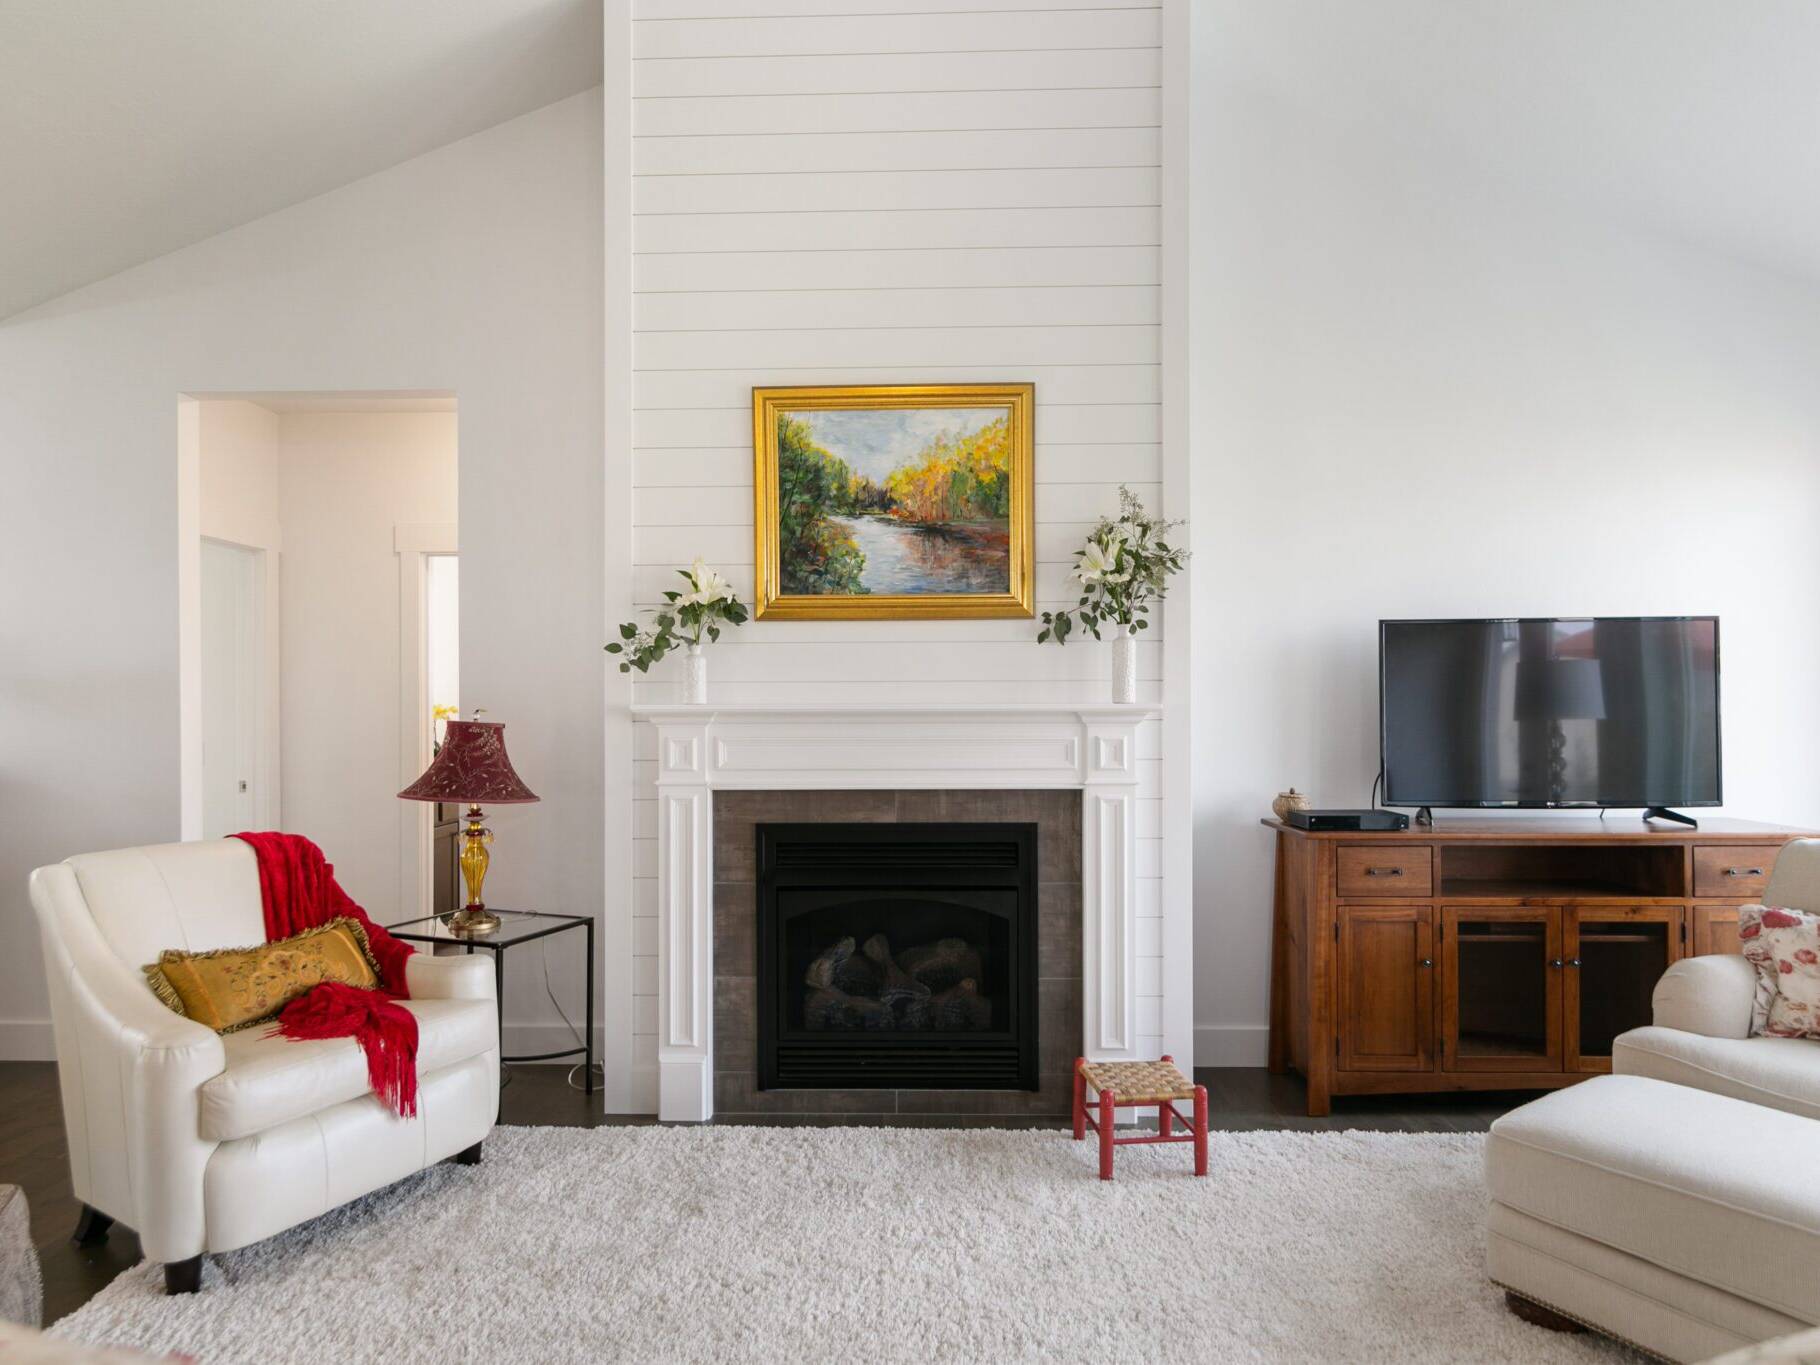 Living room and Fireplace in The Seeley model home - Built by Big Sky Builder in Hamilton, MT